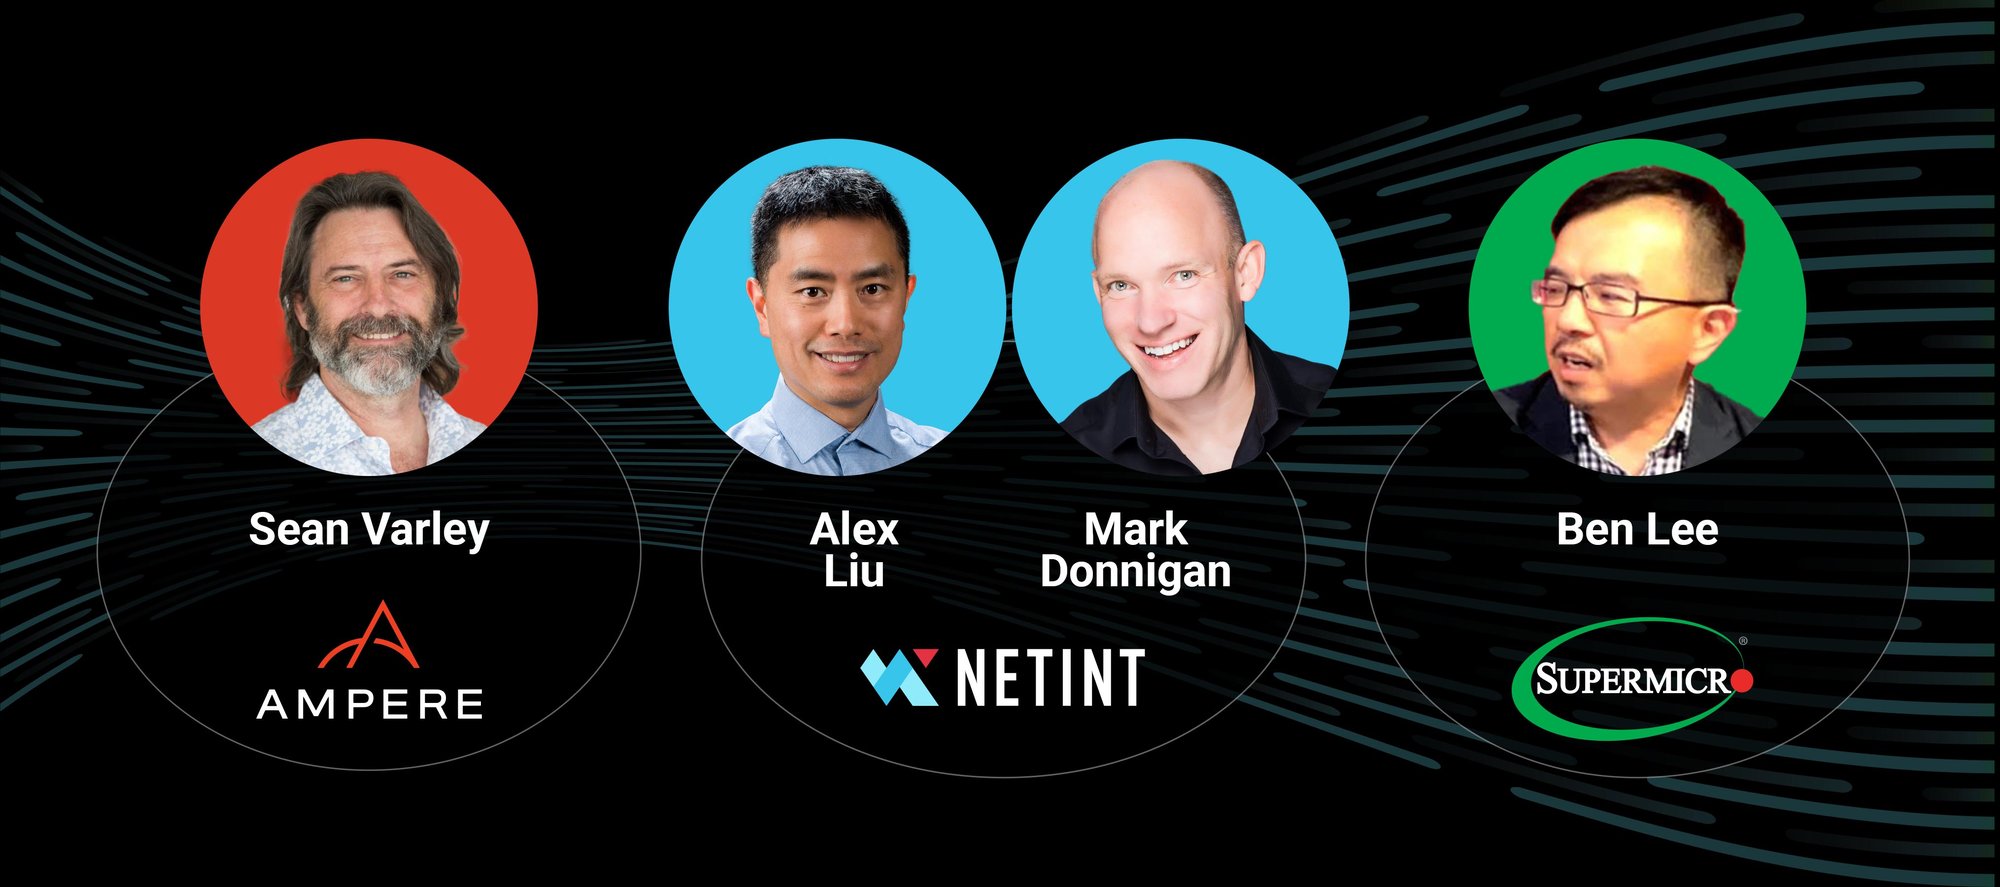 Build a Live Streaming Server that delivers 300 HD interlaced channels - webinar with Sean Varley (Ampere), Ben Lee (Supermicro), Alex Liu (NETINT).